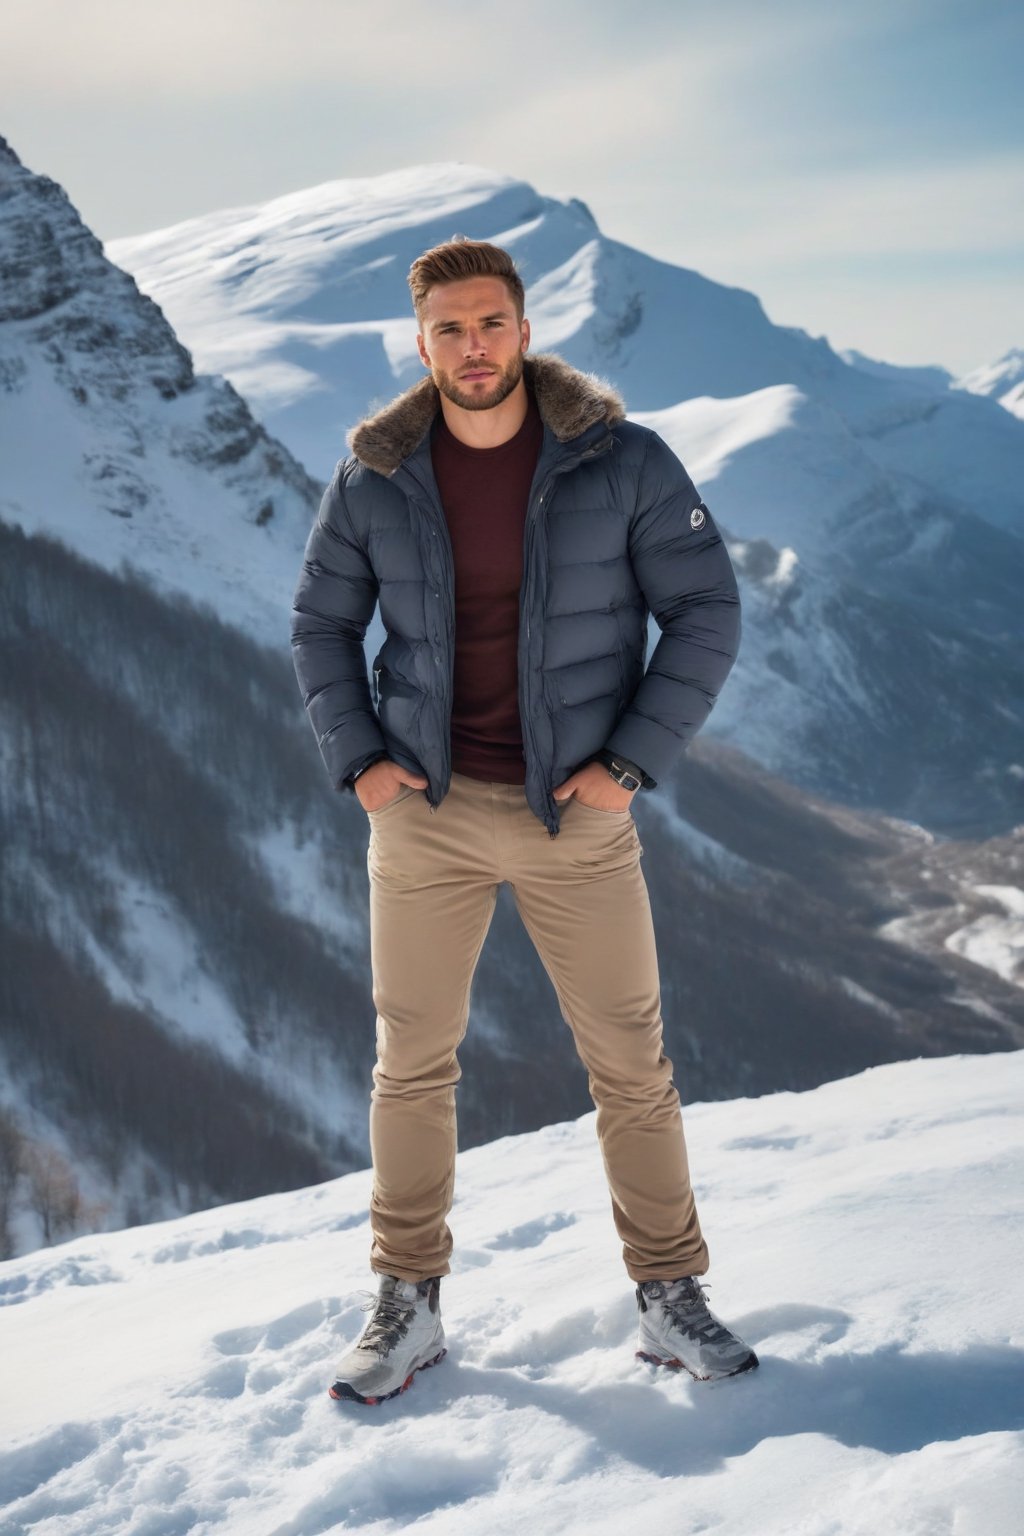 Imagine the following scene.

A handsome man standing on snow mountain.

The man has his legs open and his hands extended upwards.

His gaze lowers, looking at the floor.

The man is from Romania, muscular, 25yo. Very light brown hair, with golden highlights.

Wear sports shorts, sports shoes, and a sports jacket.

The shot is full body. best quality, 8K, high resolution, masterpiece, HD, perfect proportions, perfect hands.